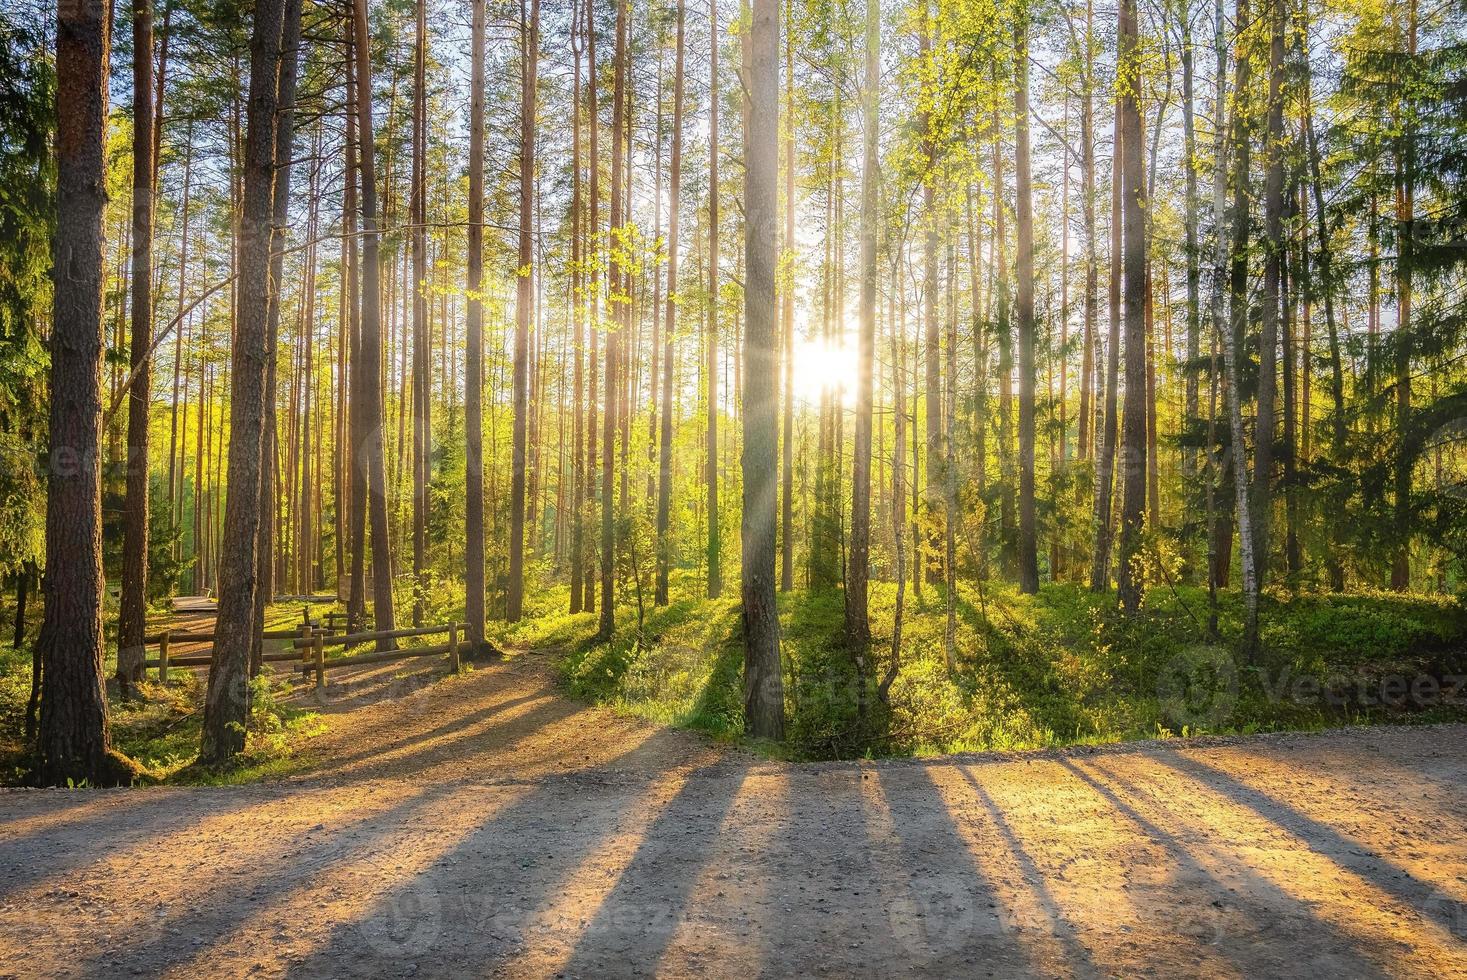 Beautiful forest in spring with bright sun shining through the trees photo